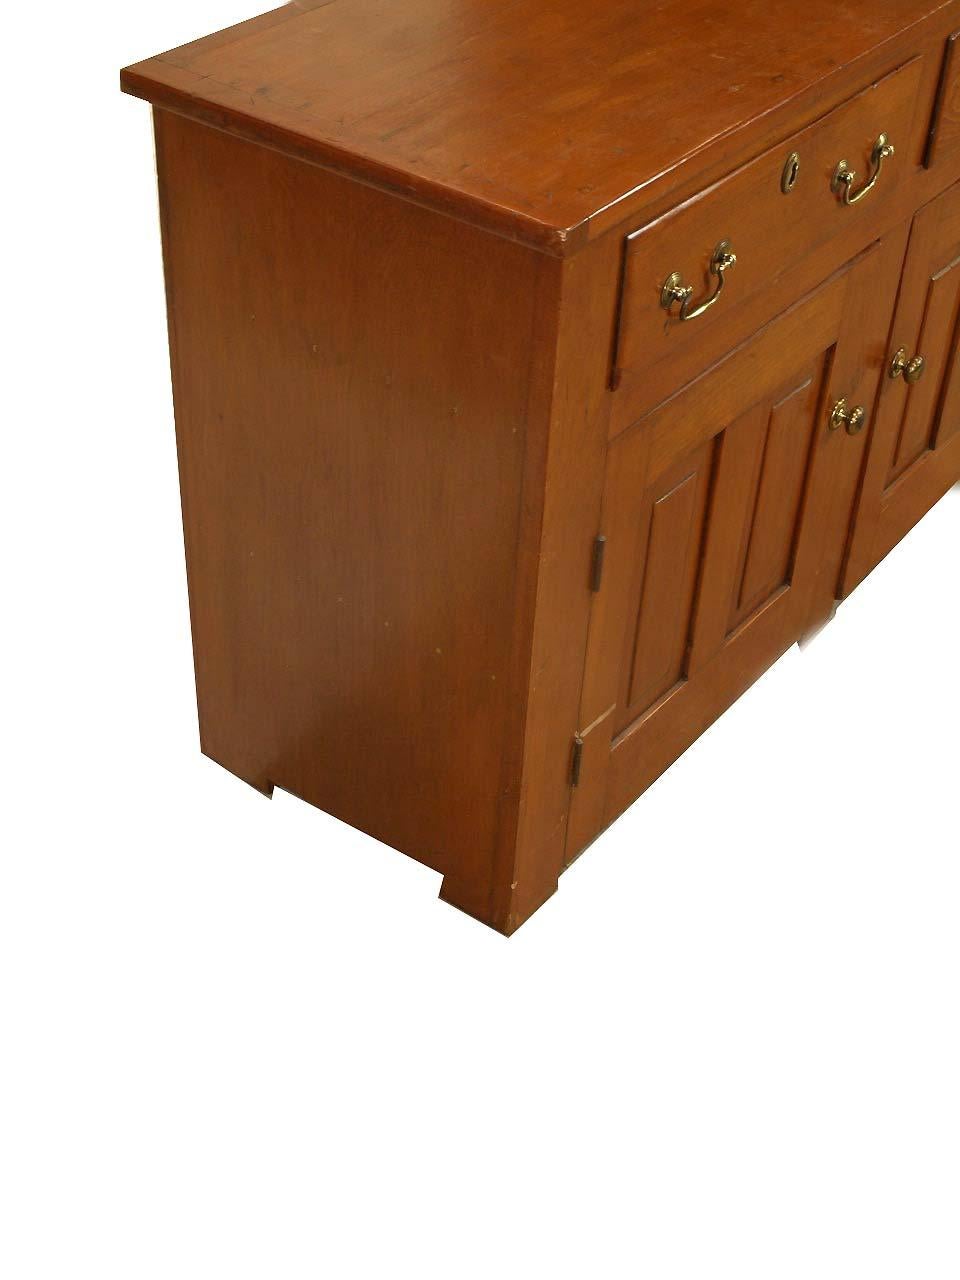 English pine sideboard with two drawers above two doors, the doors with double ''raised'' panels and ball turn latches to keep them shut; interior with an open area on the left and shelf on the right. A good feature of this piece is that it is quite